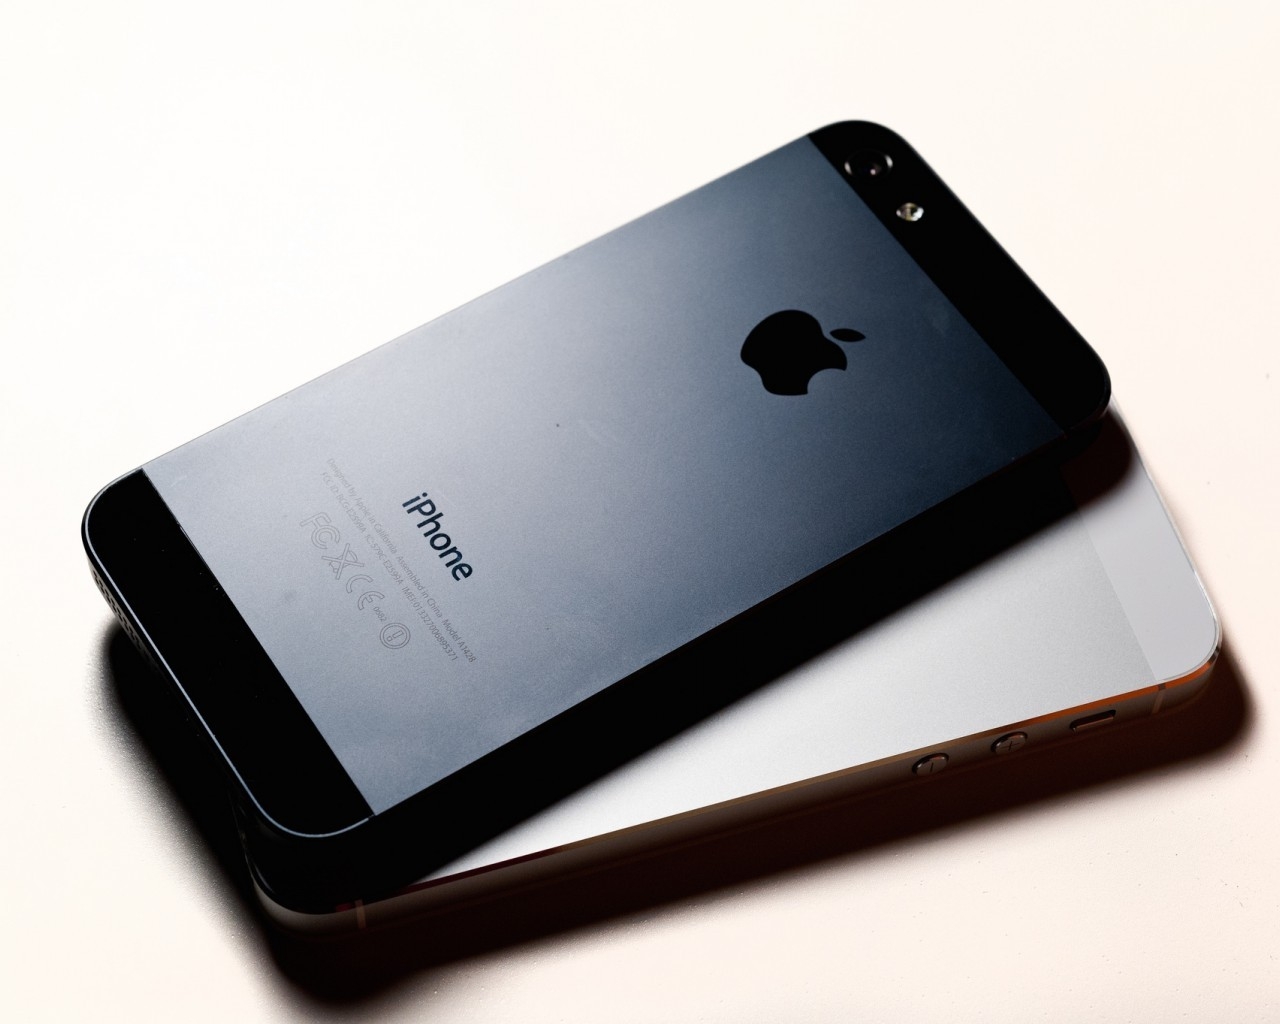 iPhone 5 Rear for 1280 x 1024 resolution